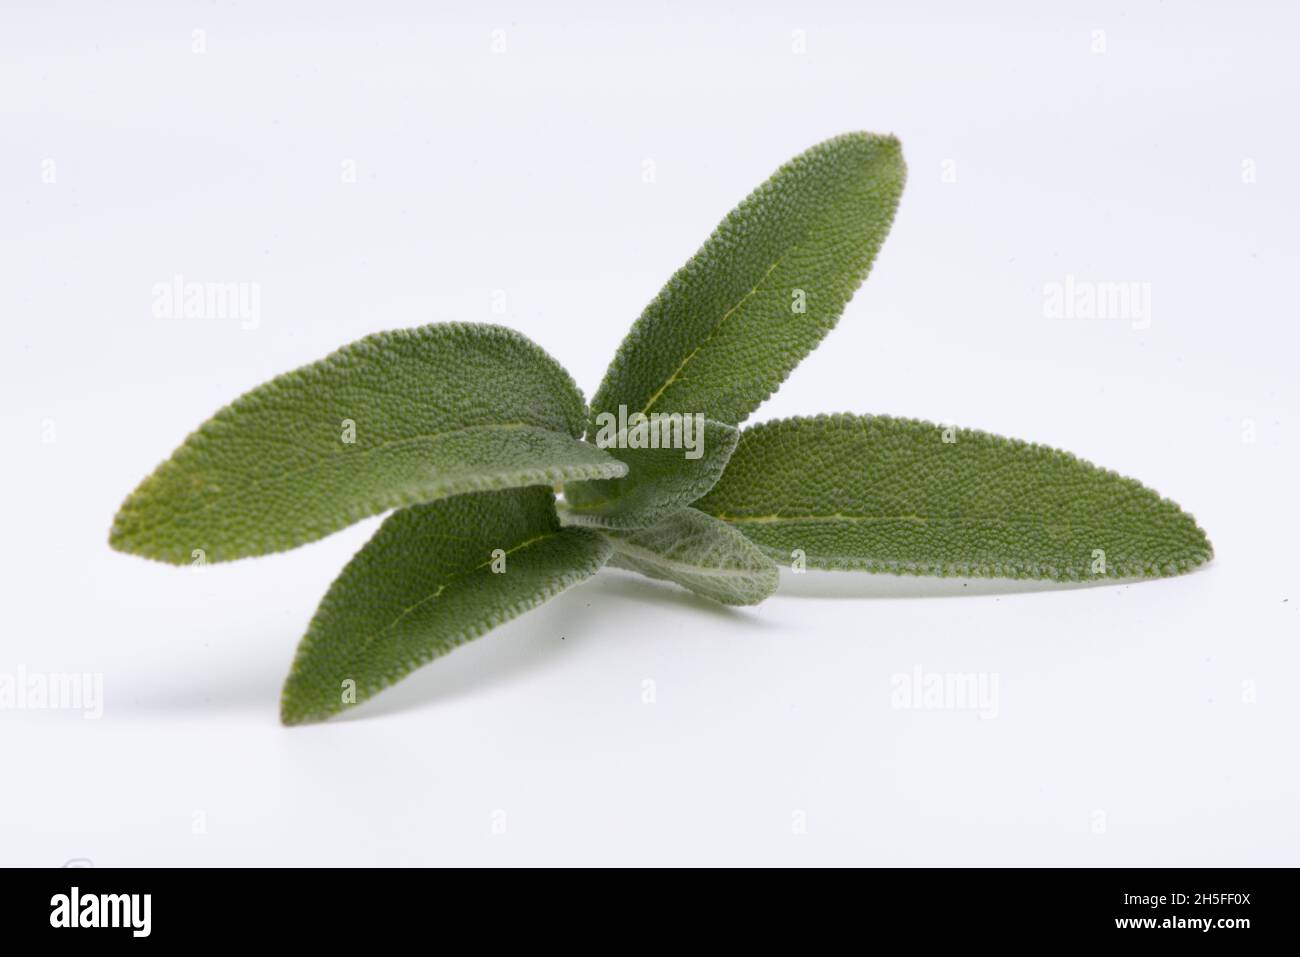 Sprig of common sage, aromatic herbaceous perennial plant, Lamiaceae family. Stock Photo